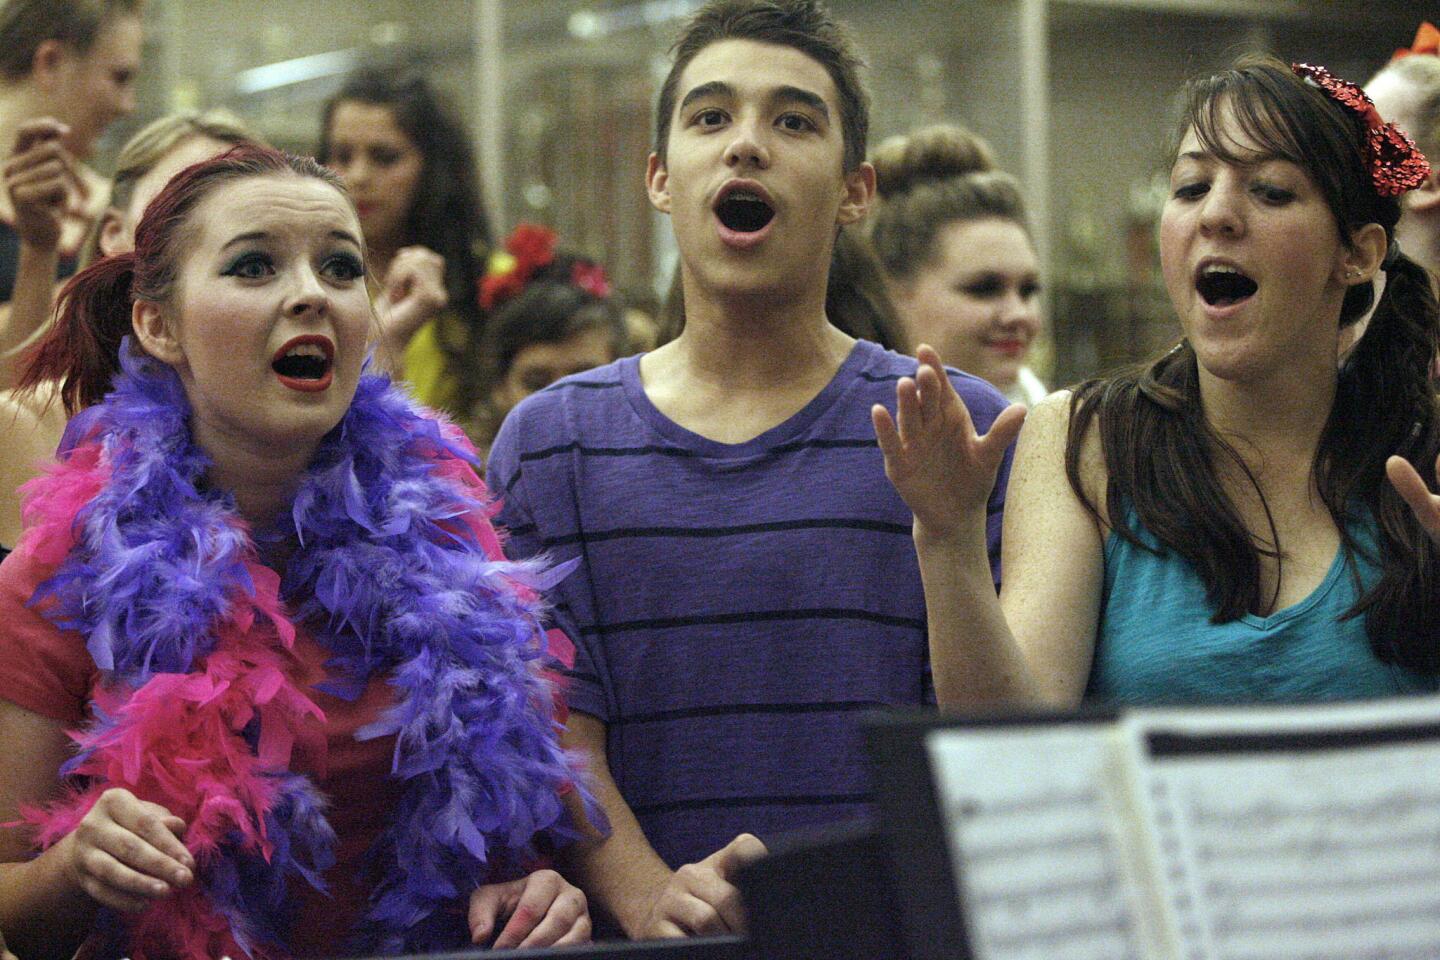 Faydean Kielty, from left, Scott McHorney and Serene Stuck rehearse their songs before their John Burroughs High School Vocal Music Assn. performance, "Burroughs on Broadway," which took place at John Burroughs High School in Burbank on Friday, October 12, 2012.